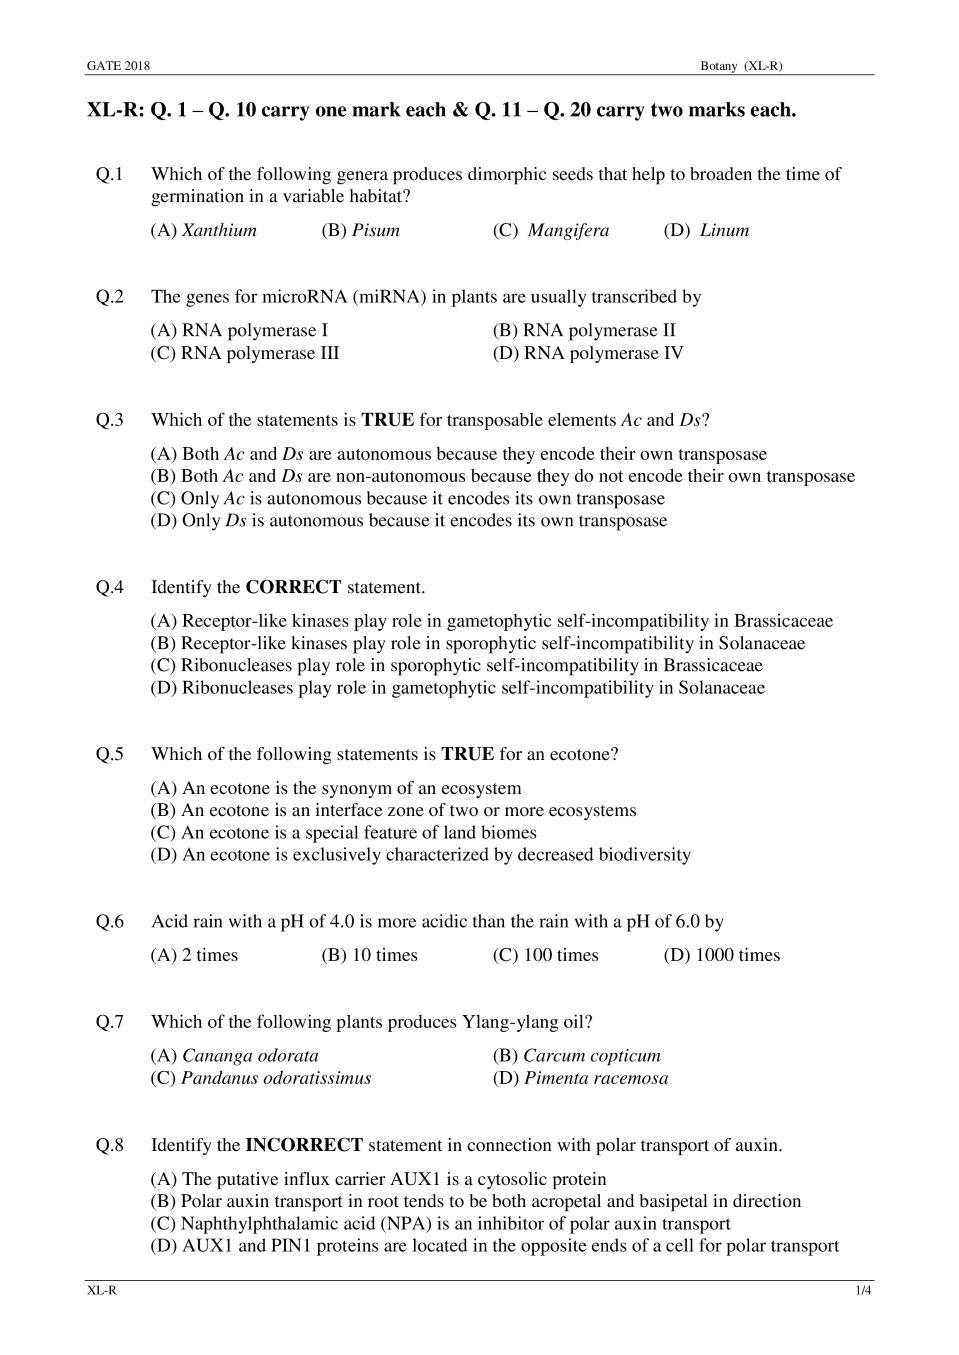 GATE 2018 Botany (XL-R) Question Paper with Answer - Page 1